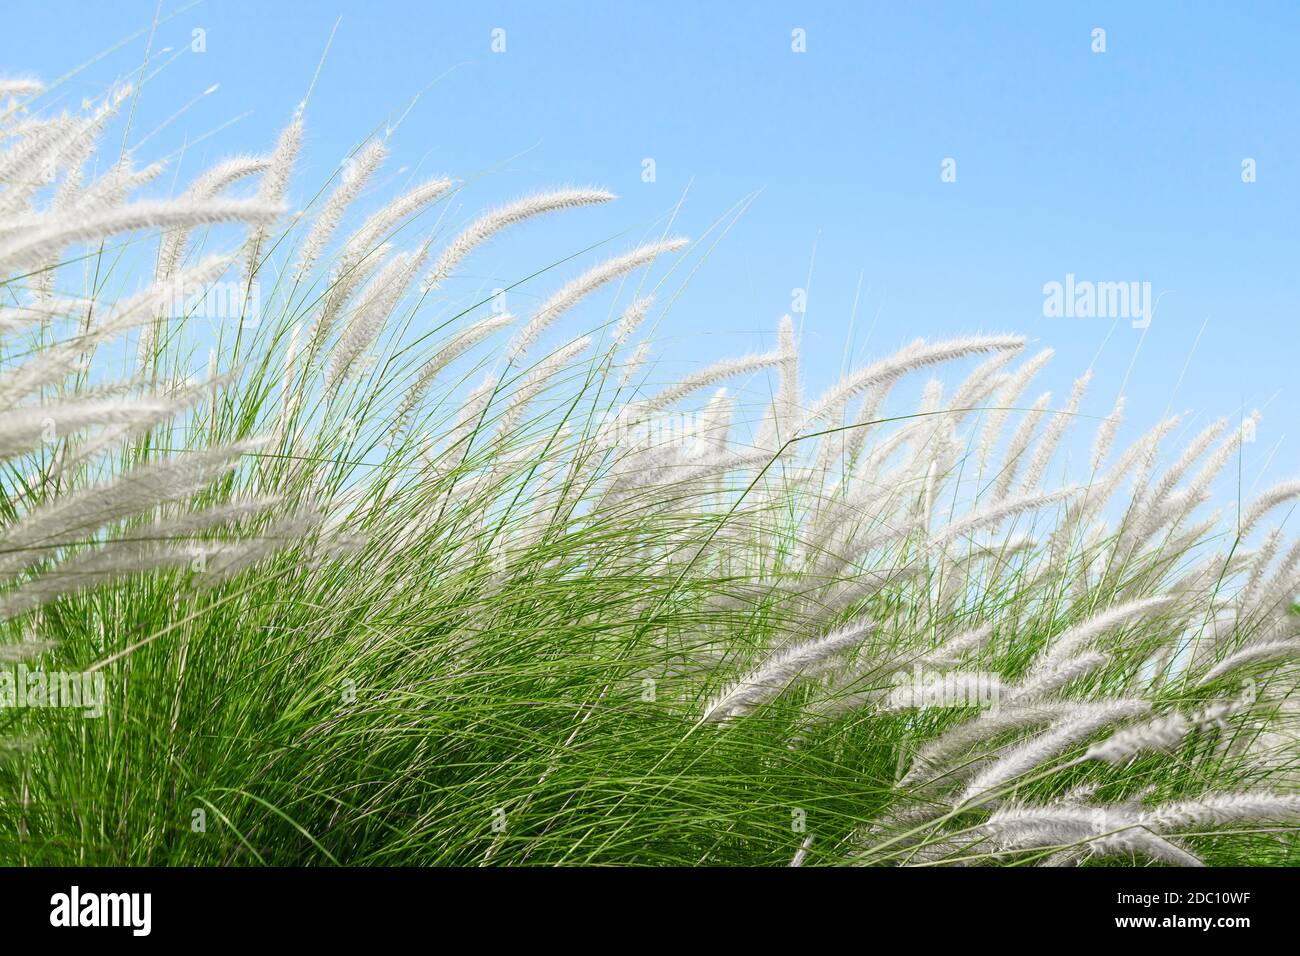 Fourtain grass or Imperata cylindrica Beauv of Feather grass in nature agent blue sky Stock Photo